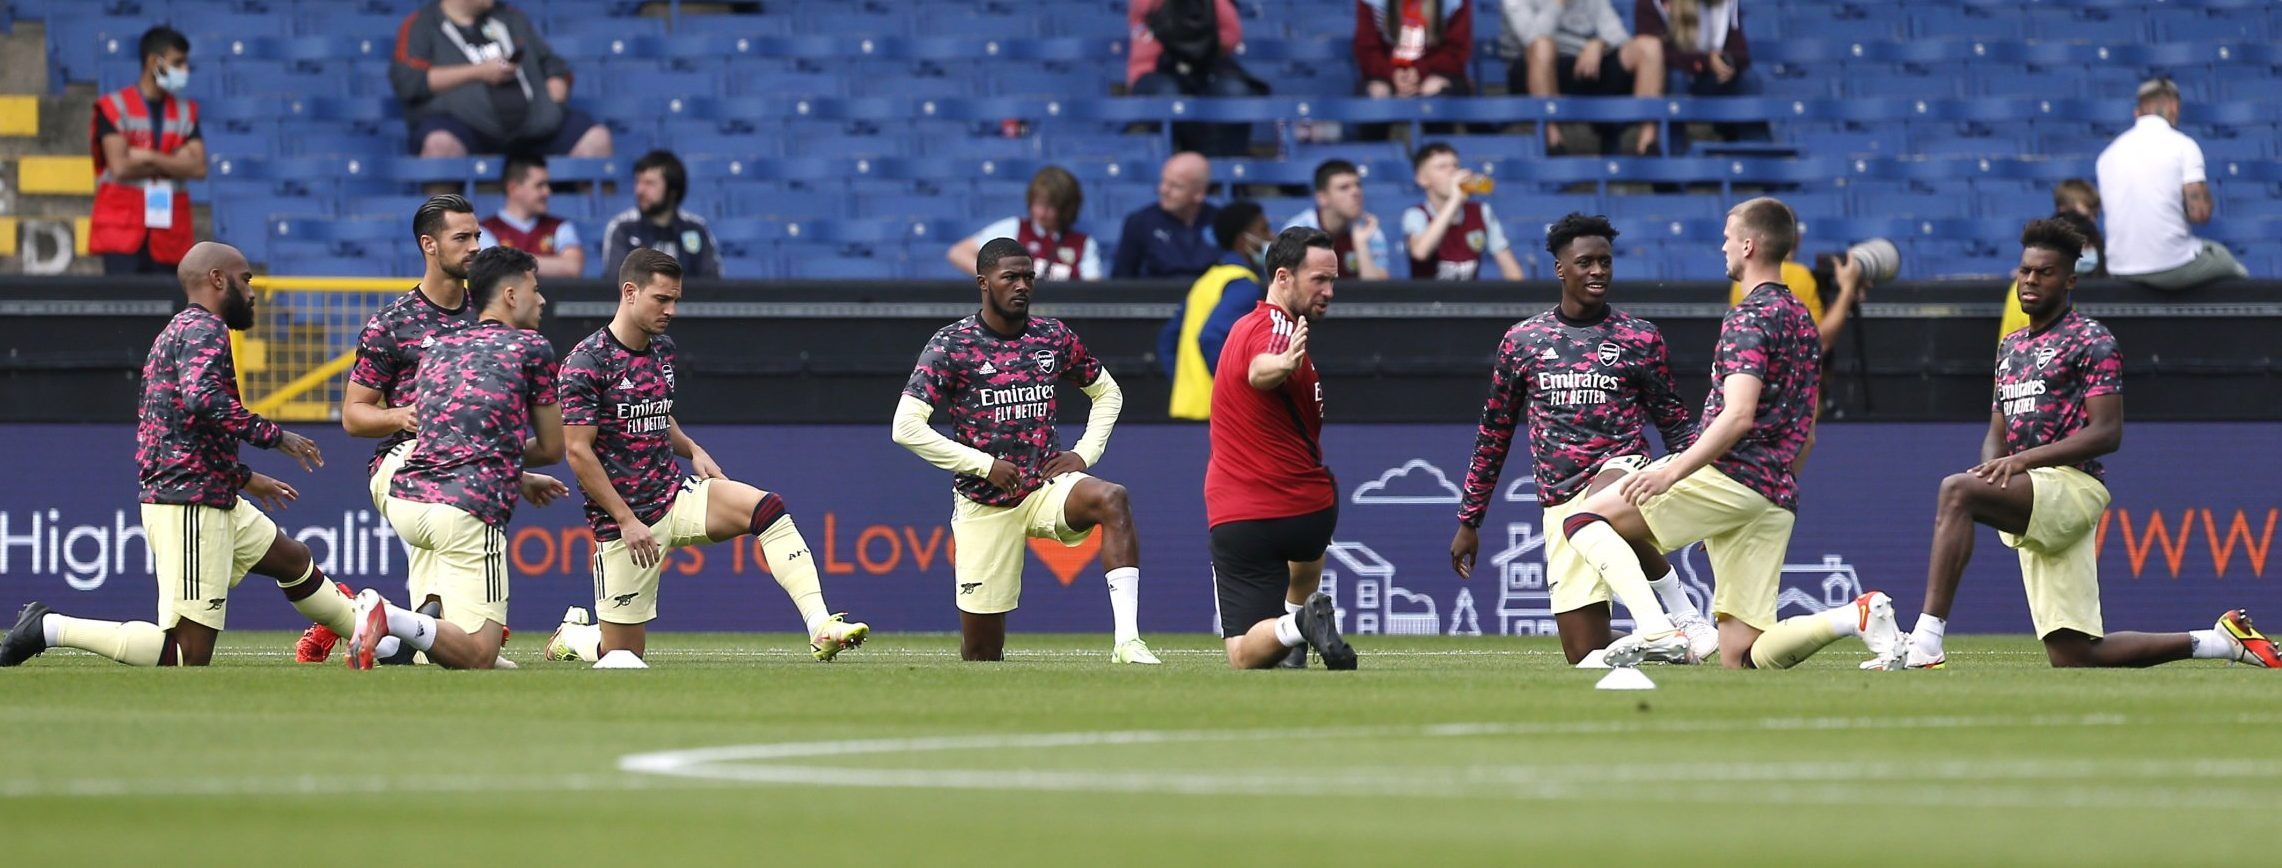 Arsenal players warm up before Burnley clash in the Premier League